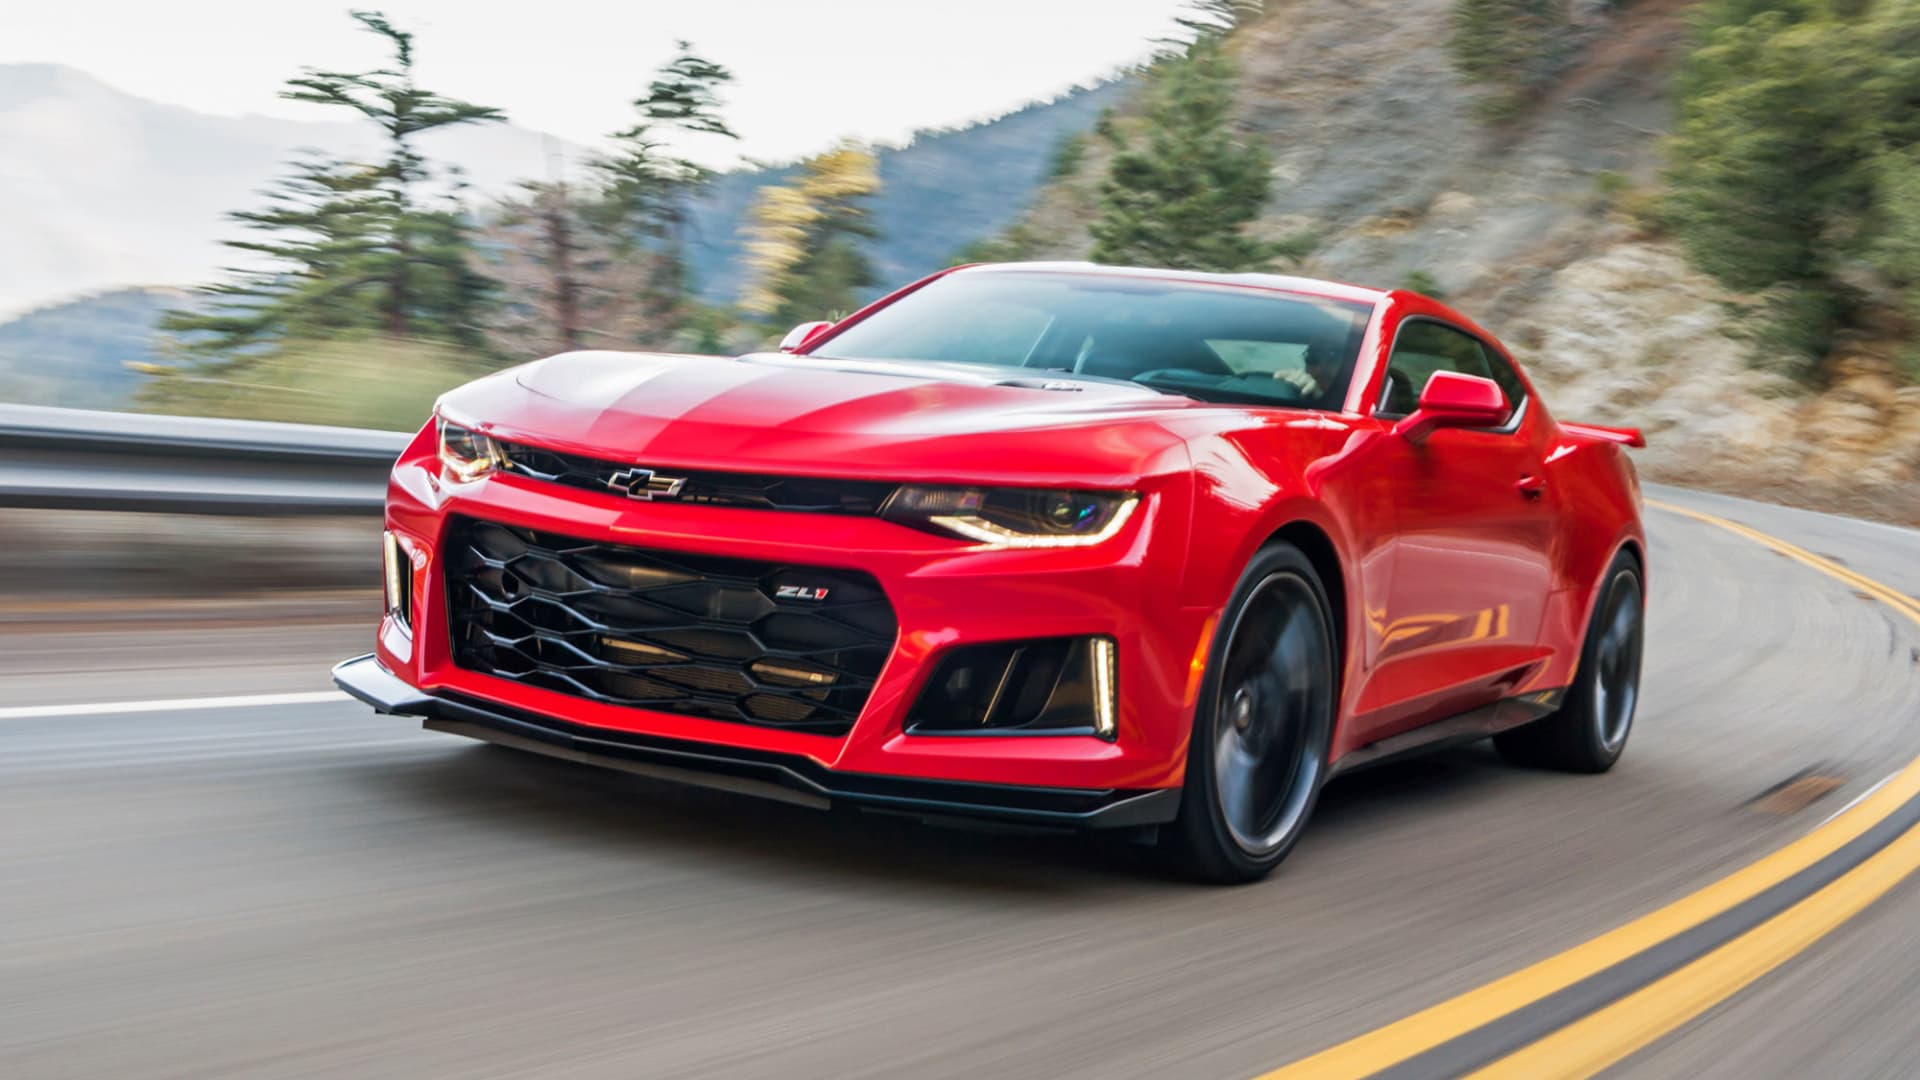 The Chevrolet Camaro as you know it will fall out of production next year, GM says Auto Recent